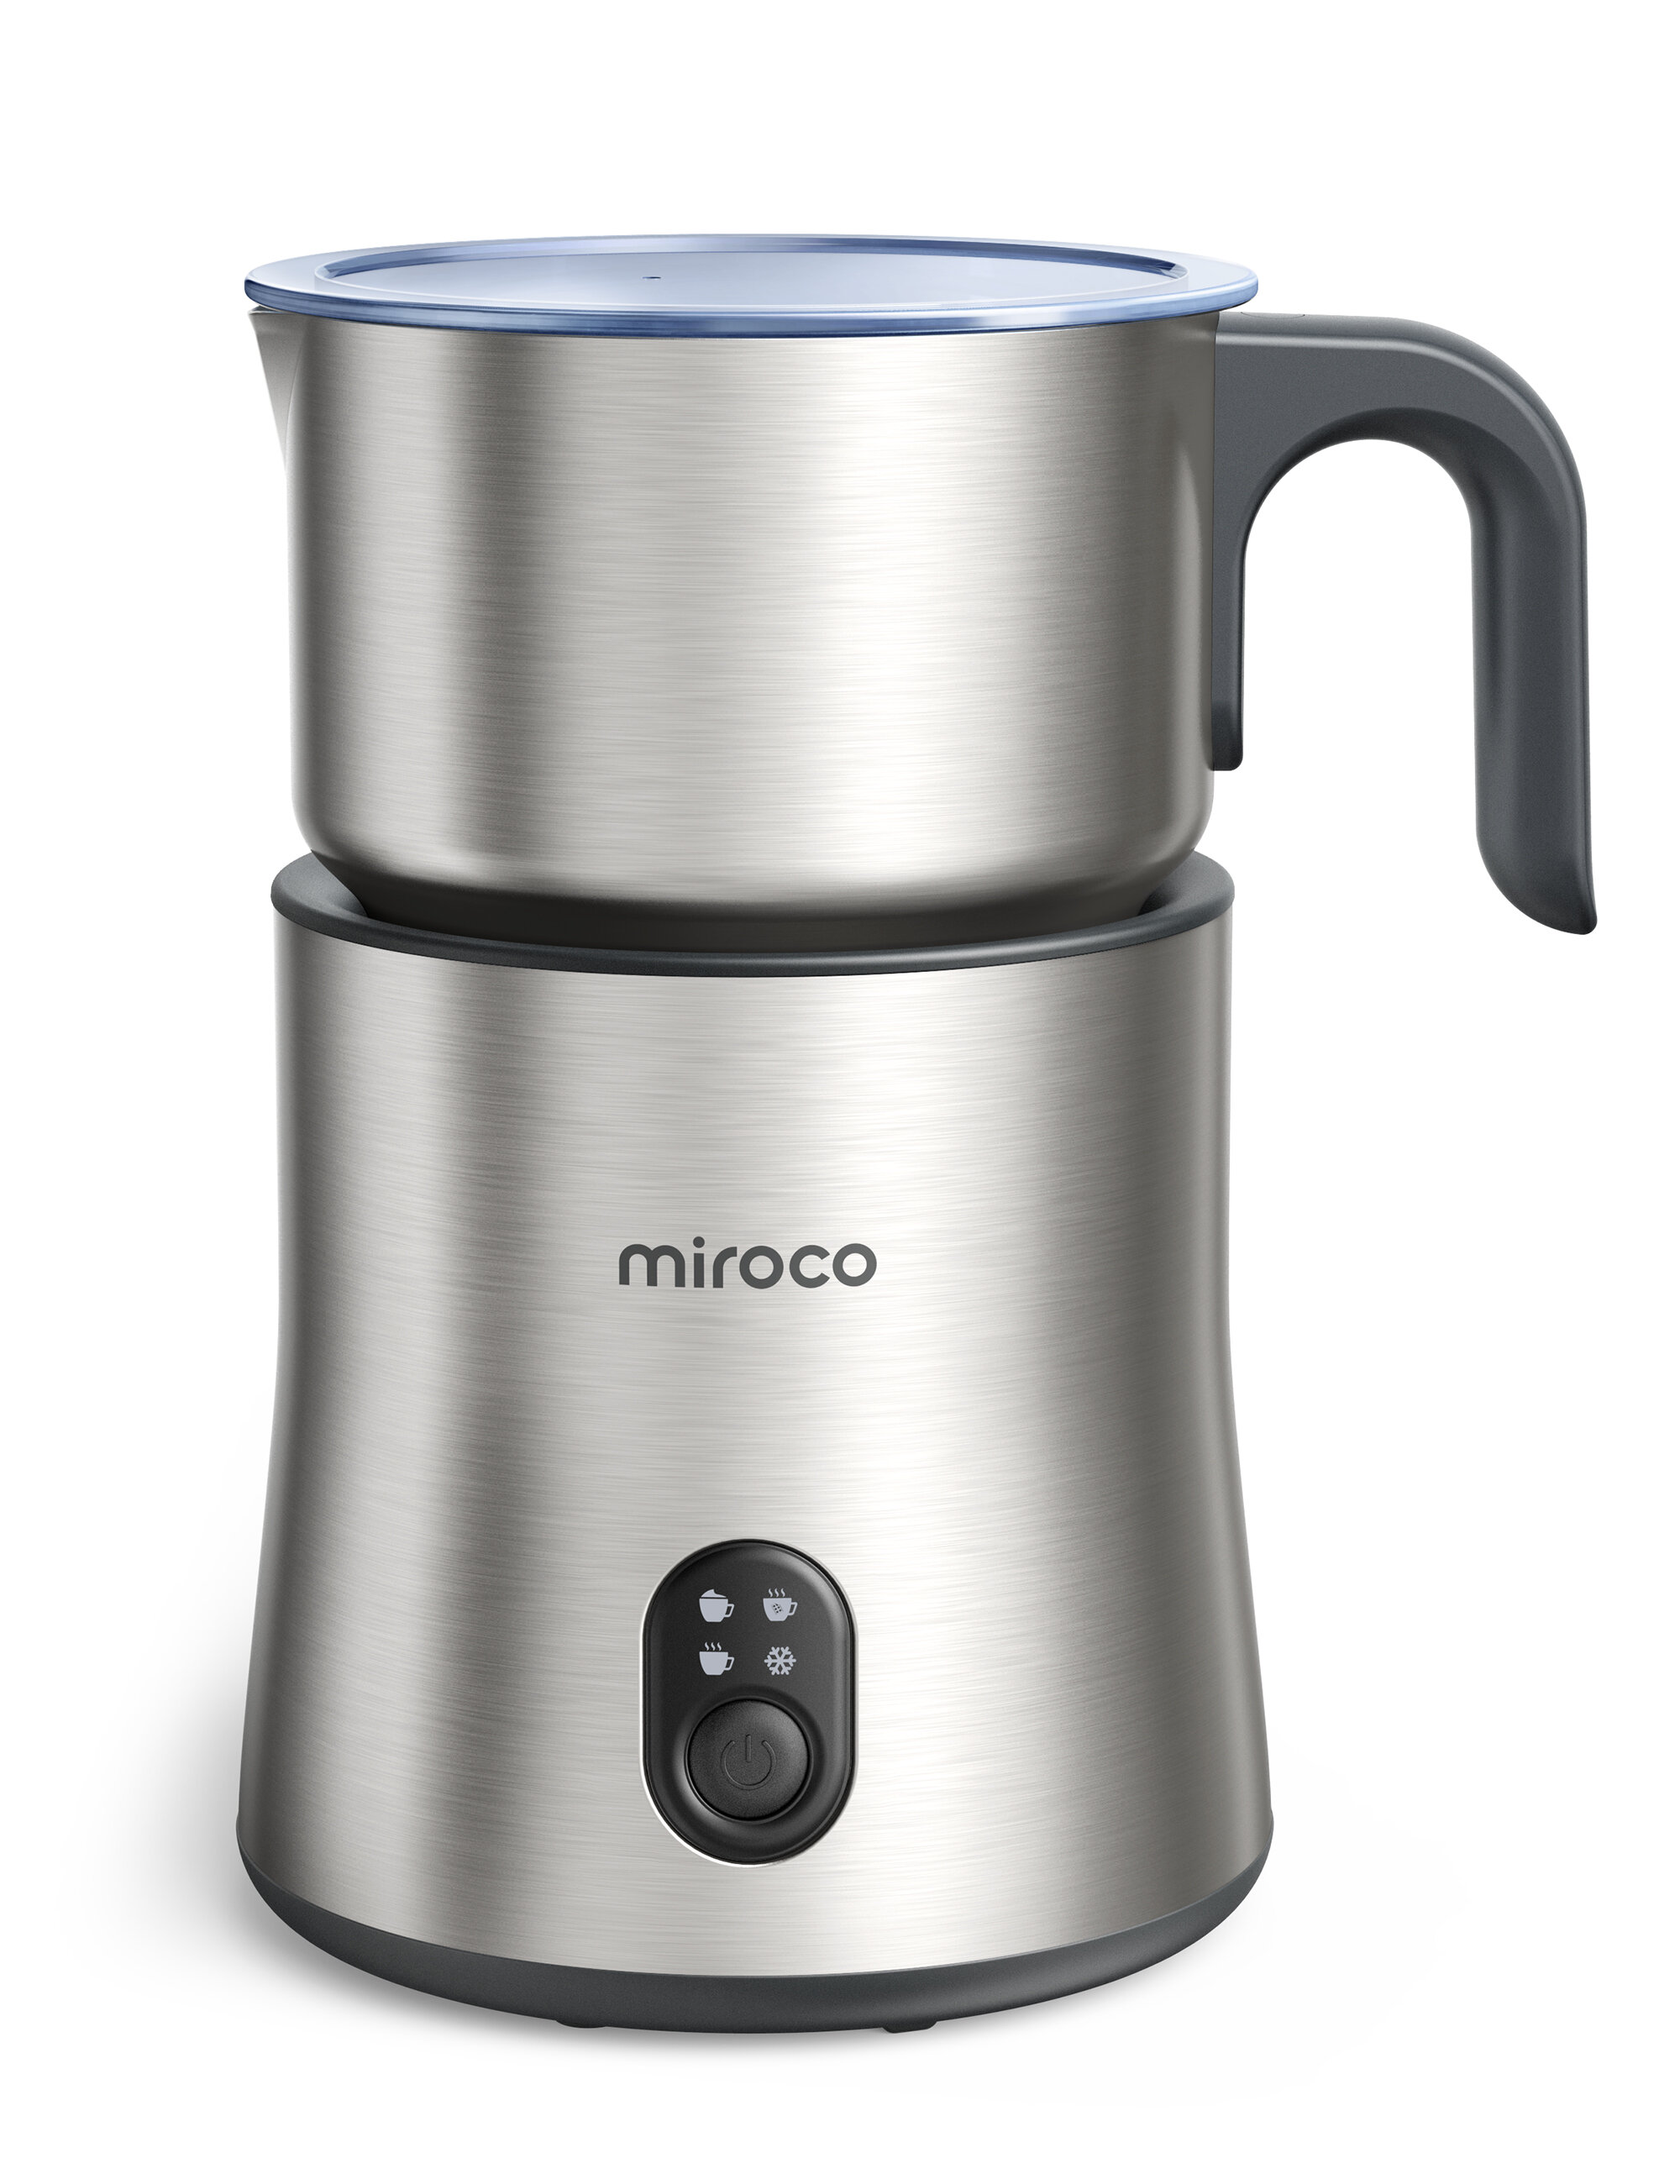 Miroco Milk Frother, Electric Milk Foam Maker 8oz for Coffee